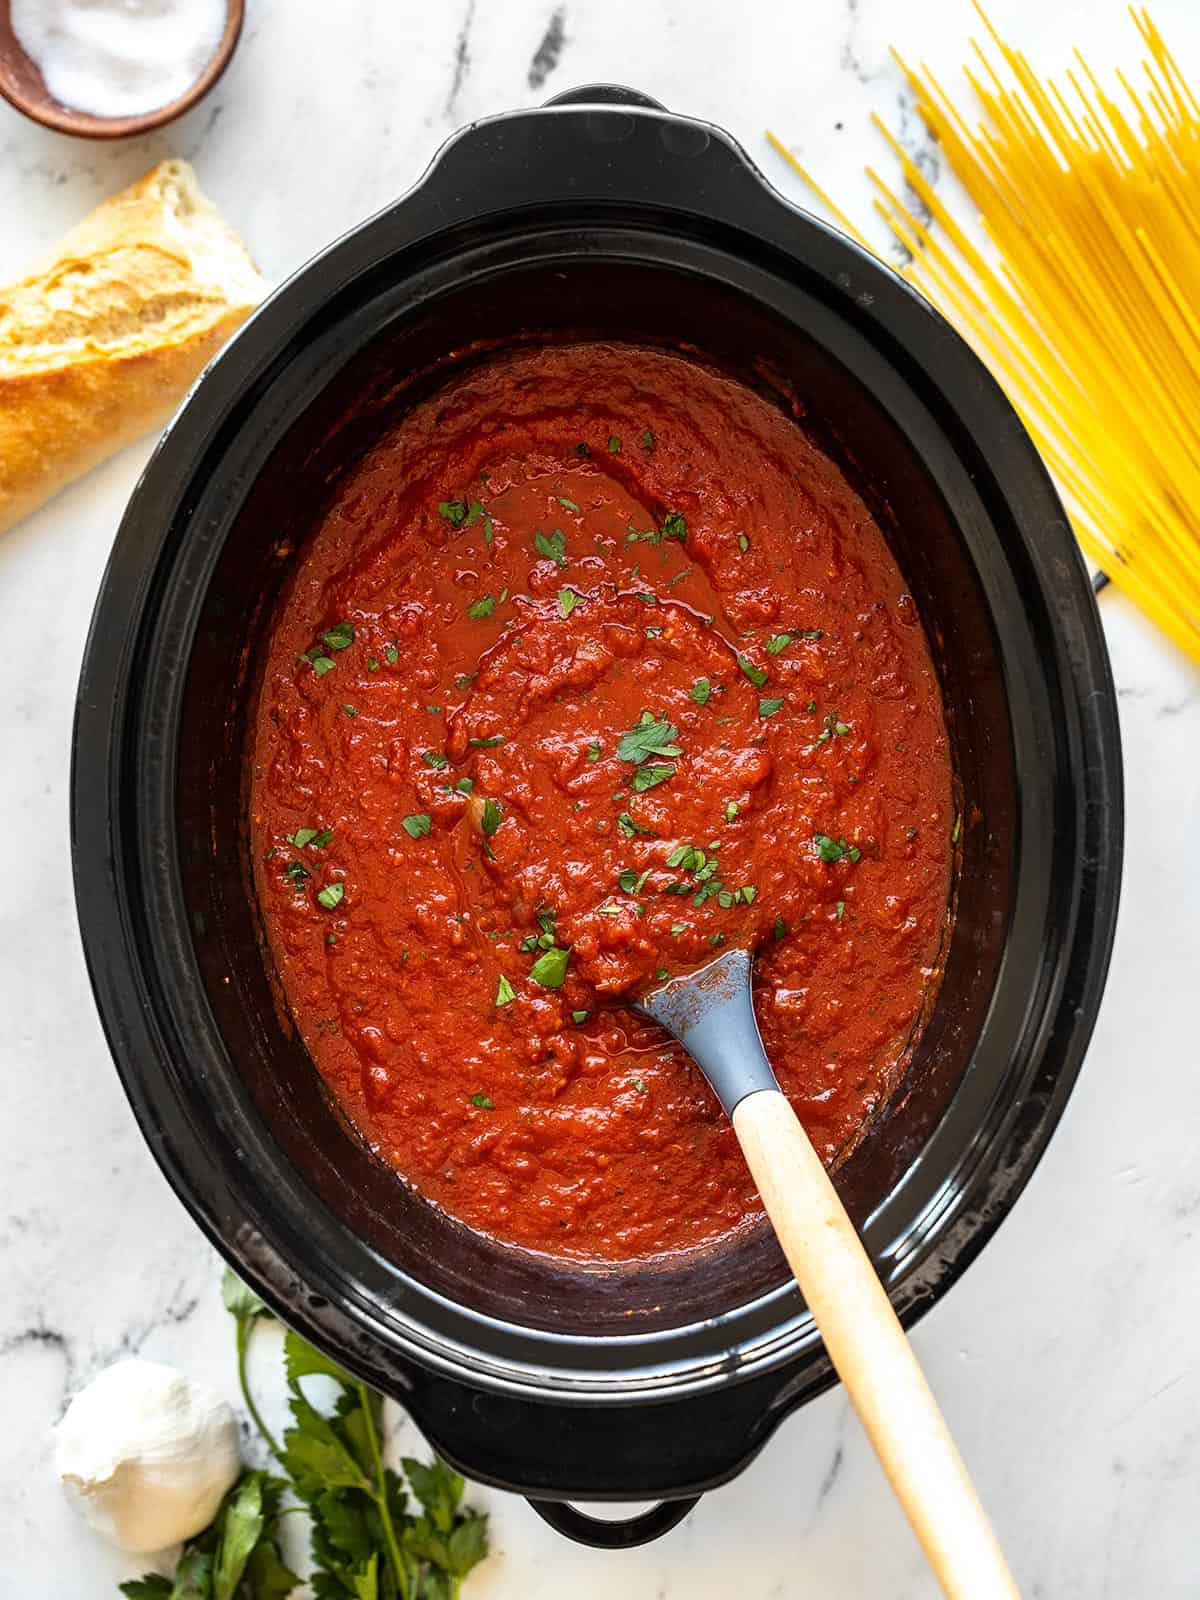 Pasta sauce in a slow cooker with a spoon, garnished with parsley